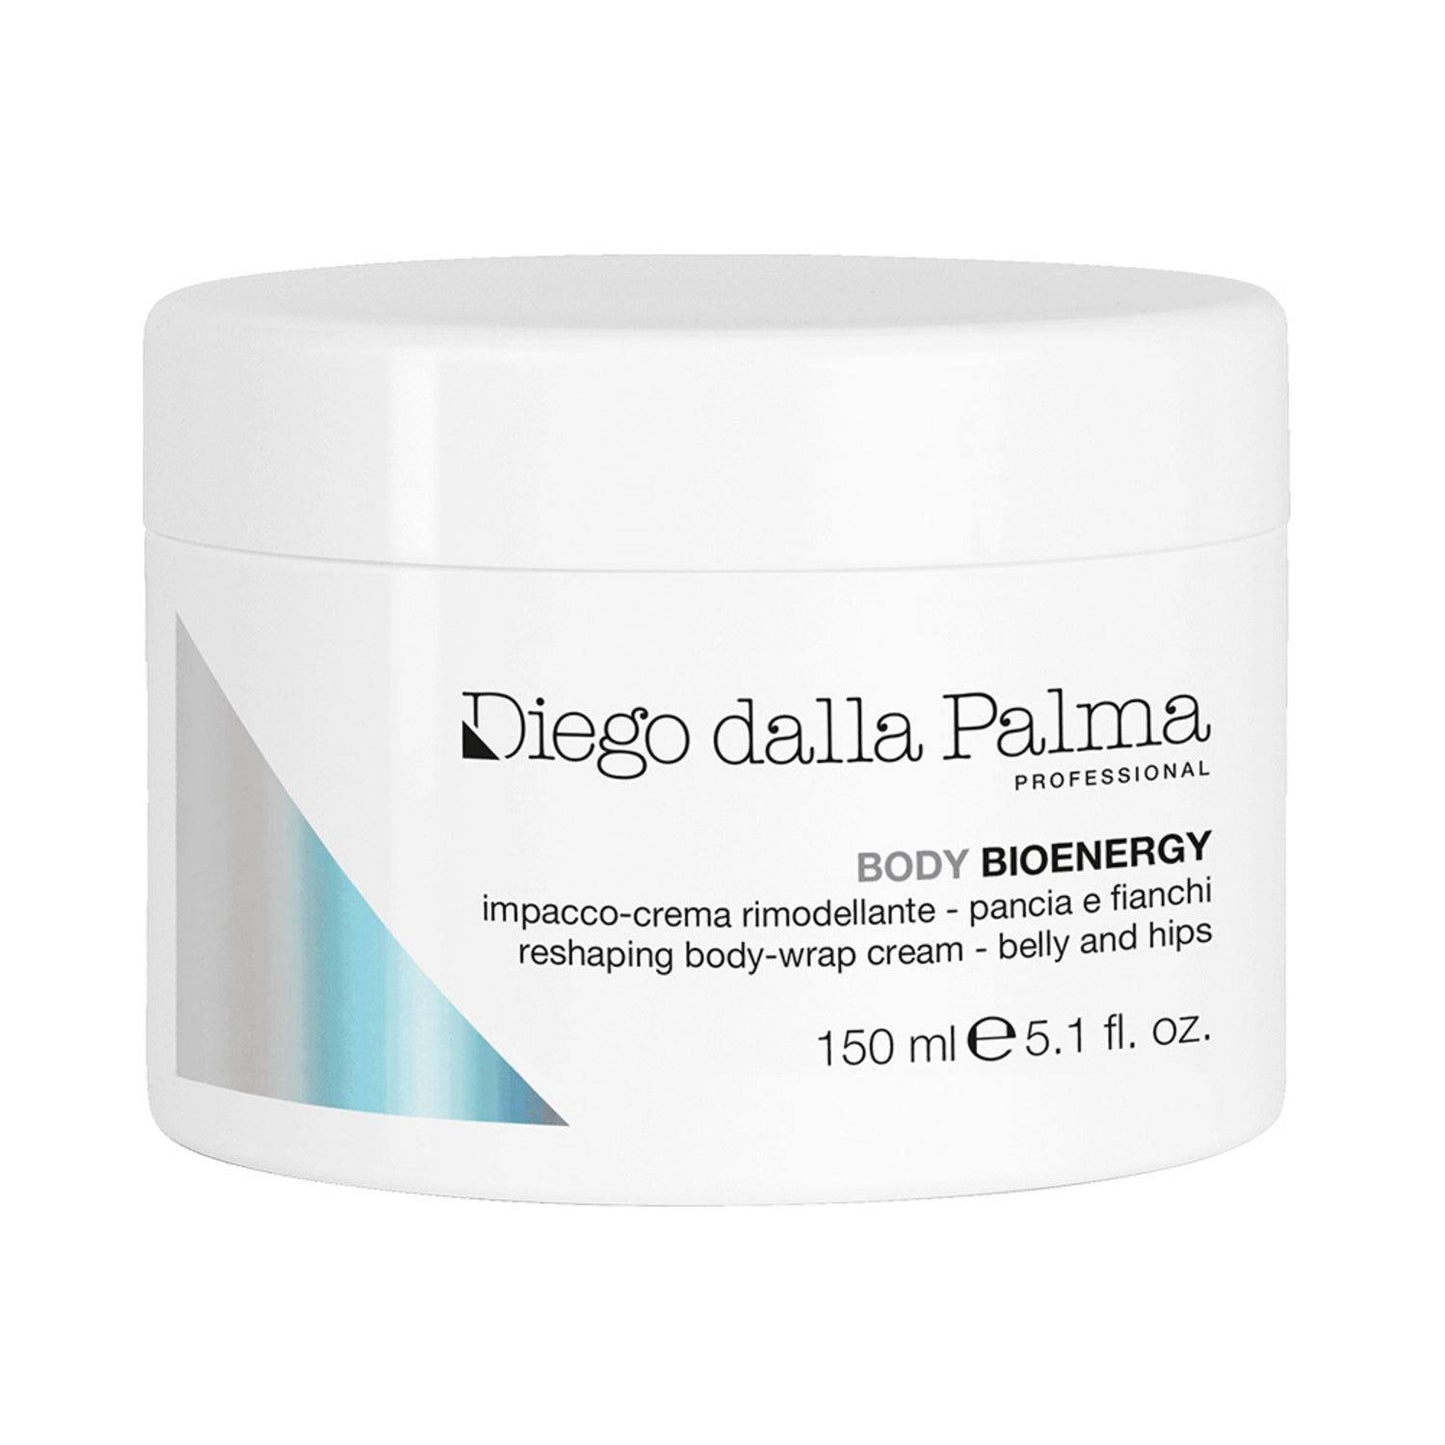 Diego dalla Palma Reshaping Body Wrap Cream- Belly and Hips